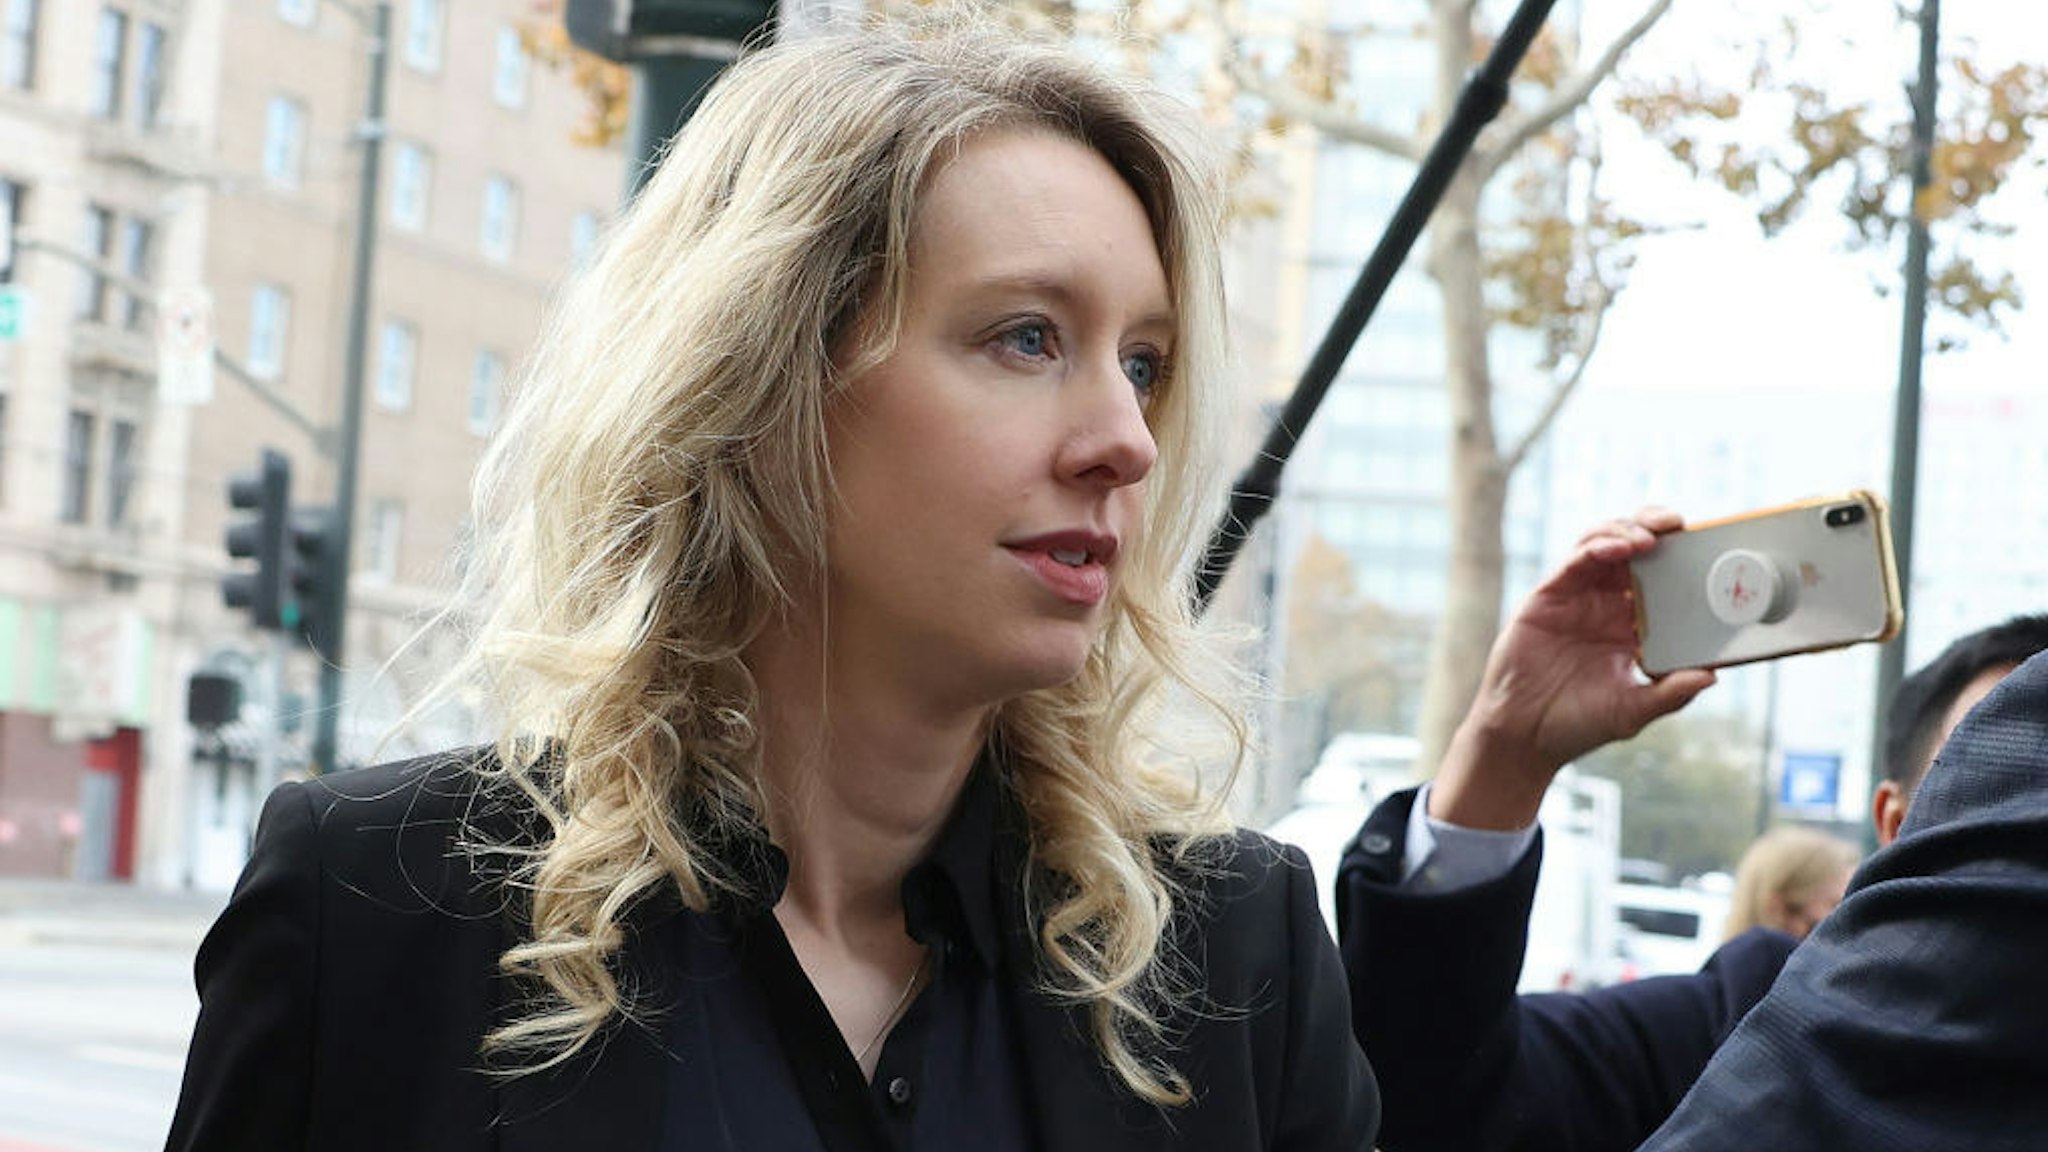 SAN JOSE, CALIFORNIA - NOVEMBER 18: Former Theranos CEO Elizabeth Holmes on November 18, 2022 in San Jose, California. Holmes appeared in federal court for sentencing after being convicted of four counts of fraud for allegedly engaging in a multimillion-dollar scheme to defraud investors in her company Theranos, which offered blood testing lab services.